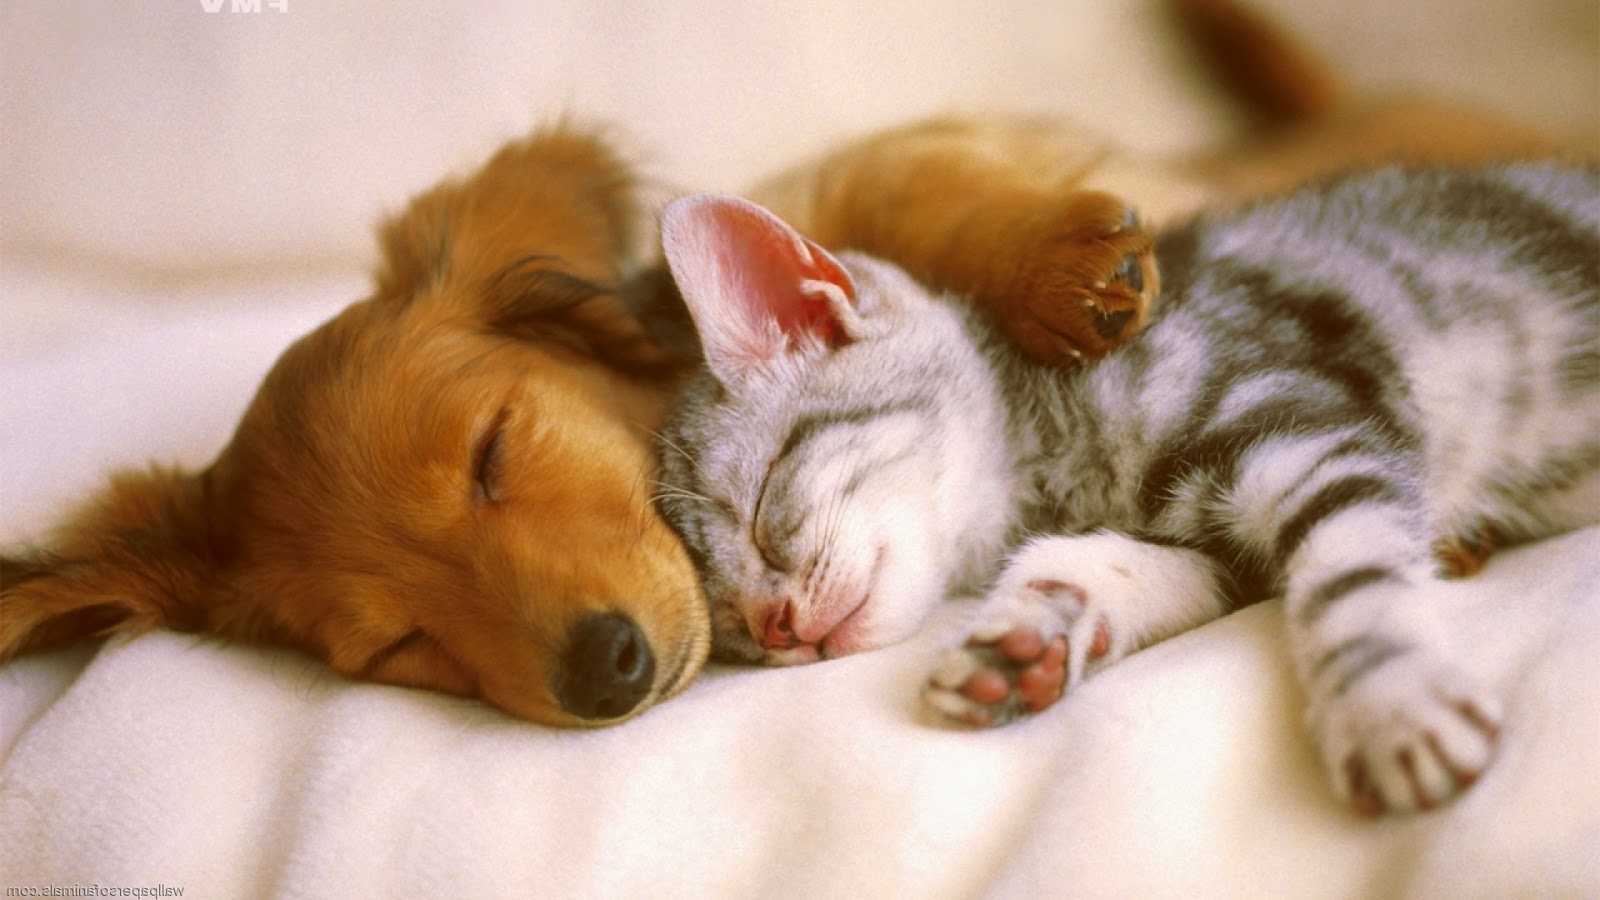 A photo of a tan puppy and a gray tabby kitten sleeping together